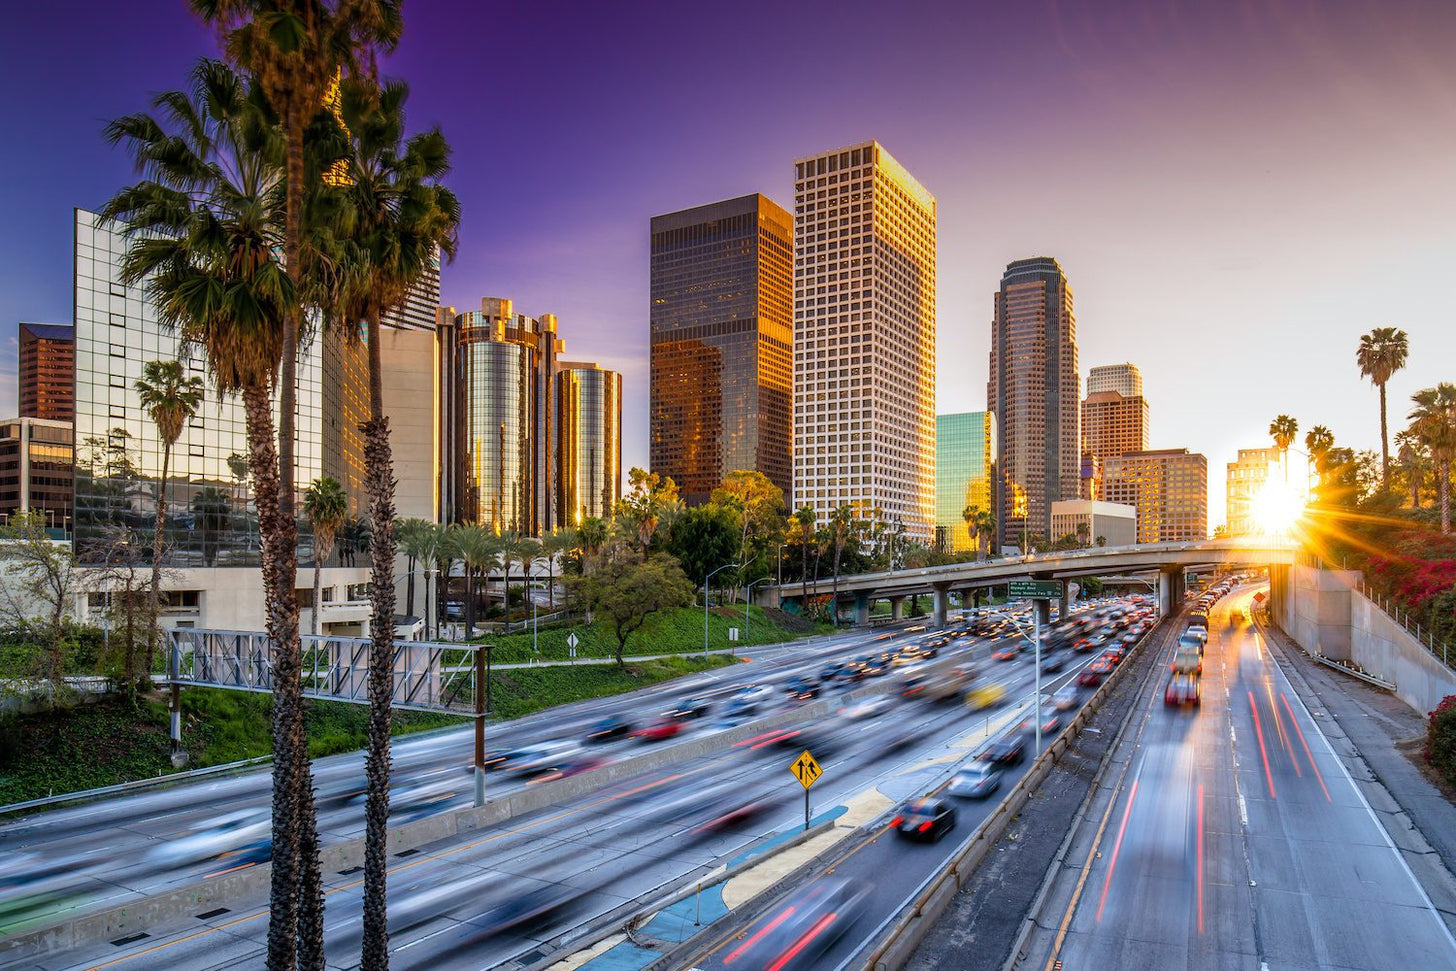 A photo of an LA highway with a palm tree and some city buildings in view